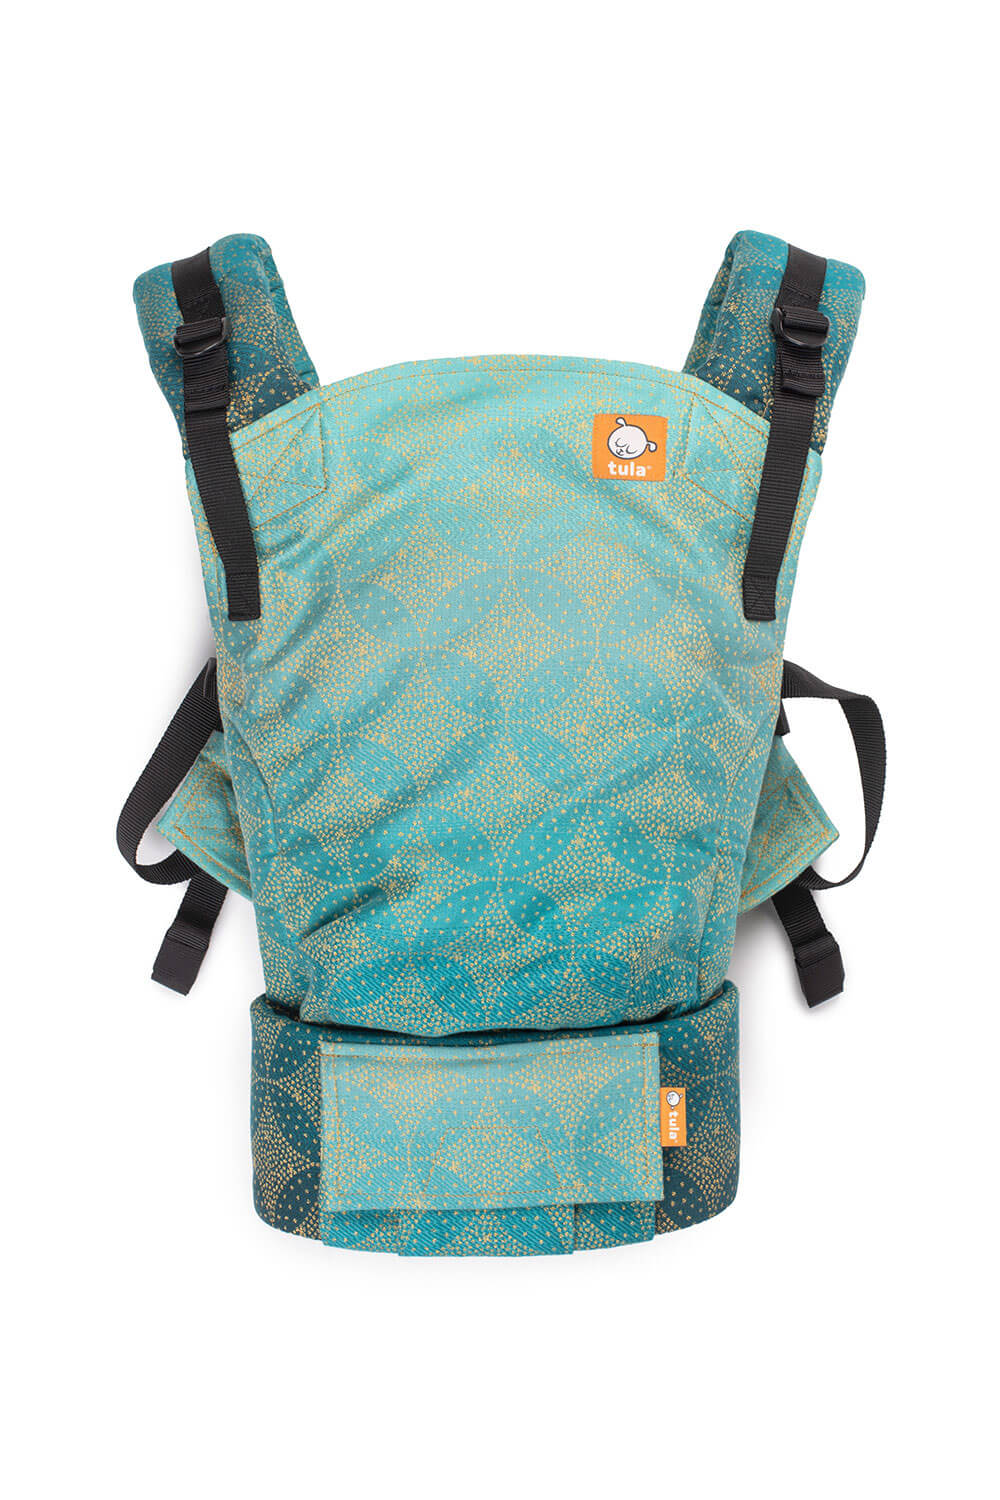 Starry Night Gold Dust - Signature Woven Free-to-Grow Baby Carrier